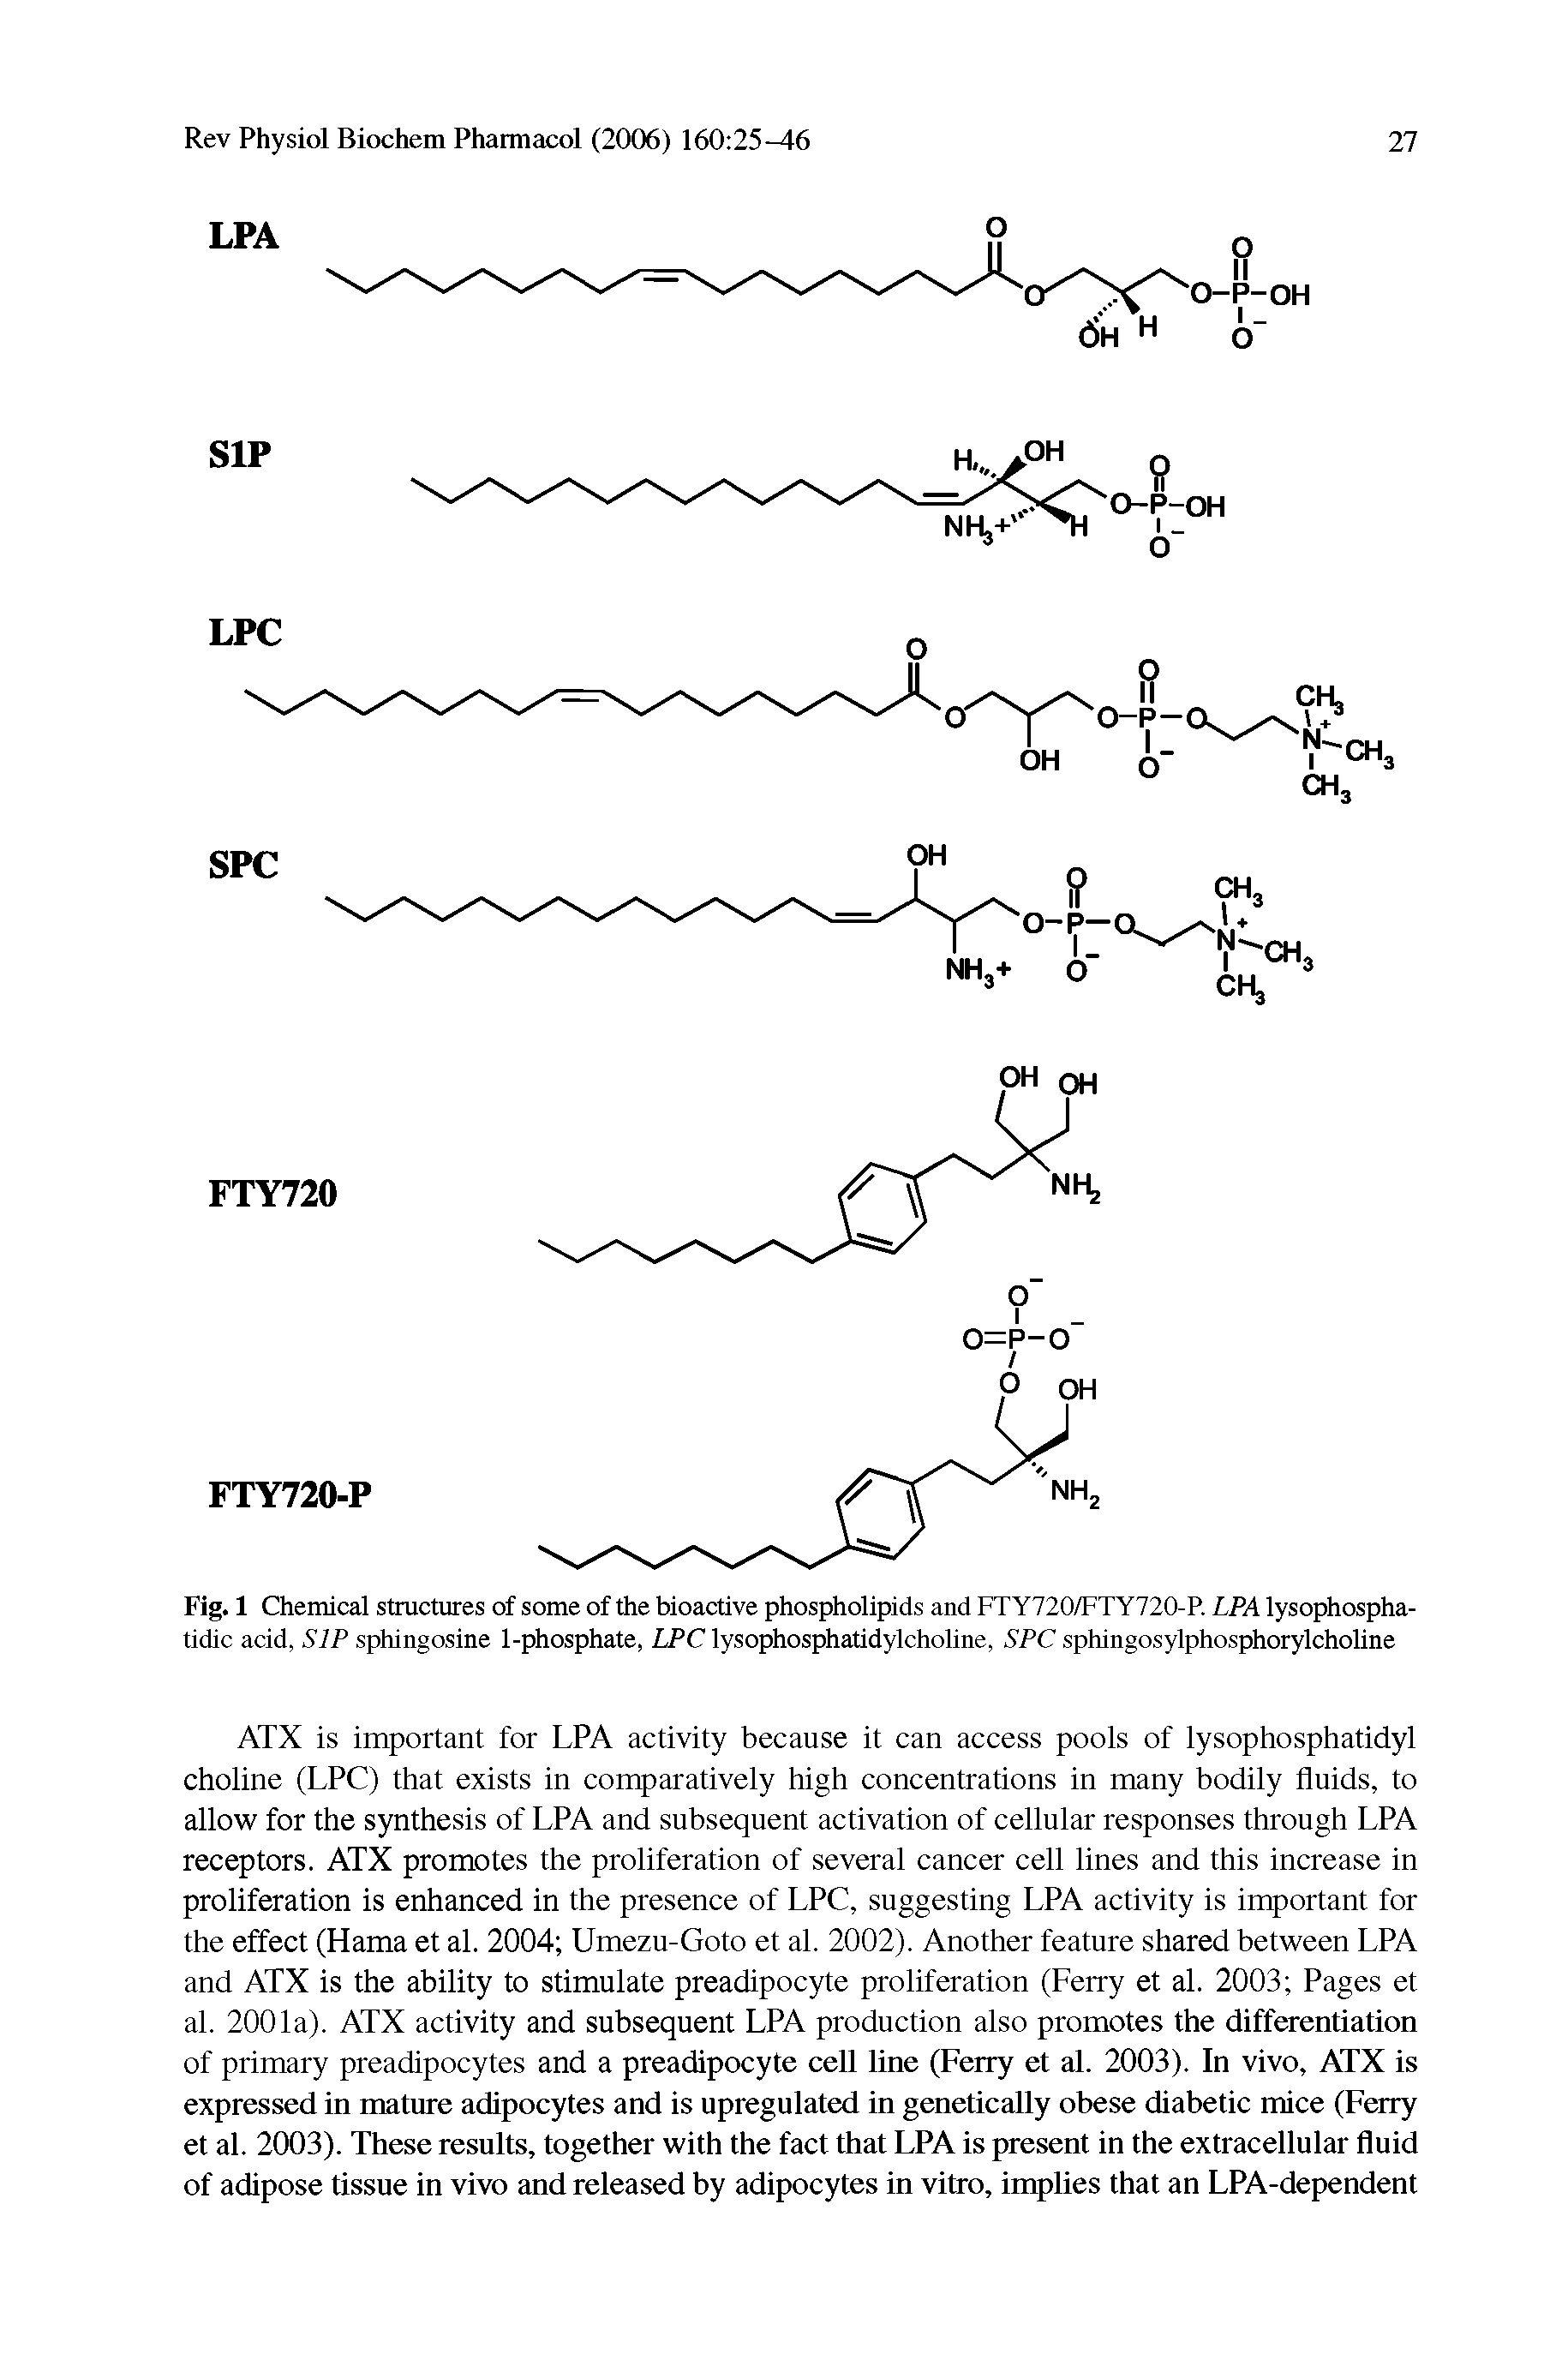 Fig. 1 Chemical structures of some of the bioactive phospholipids and FTY720/FTY720-P. LPA lysophosphatidic acid, SIP sphingosine 1-phosphate, LPC lysophosphatidylcholine, SPC sphingosylphosphorylcholine...